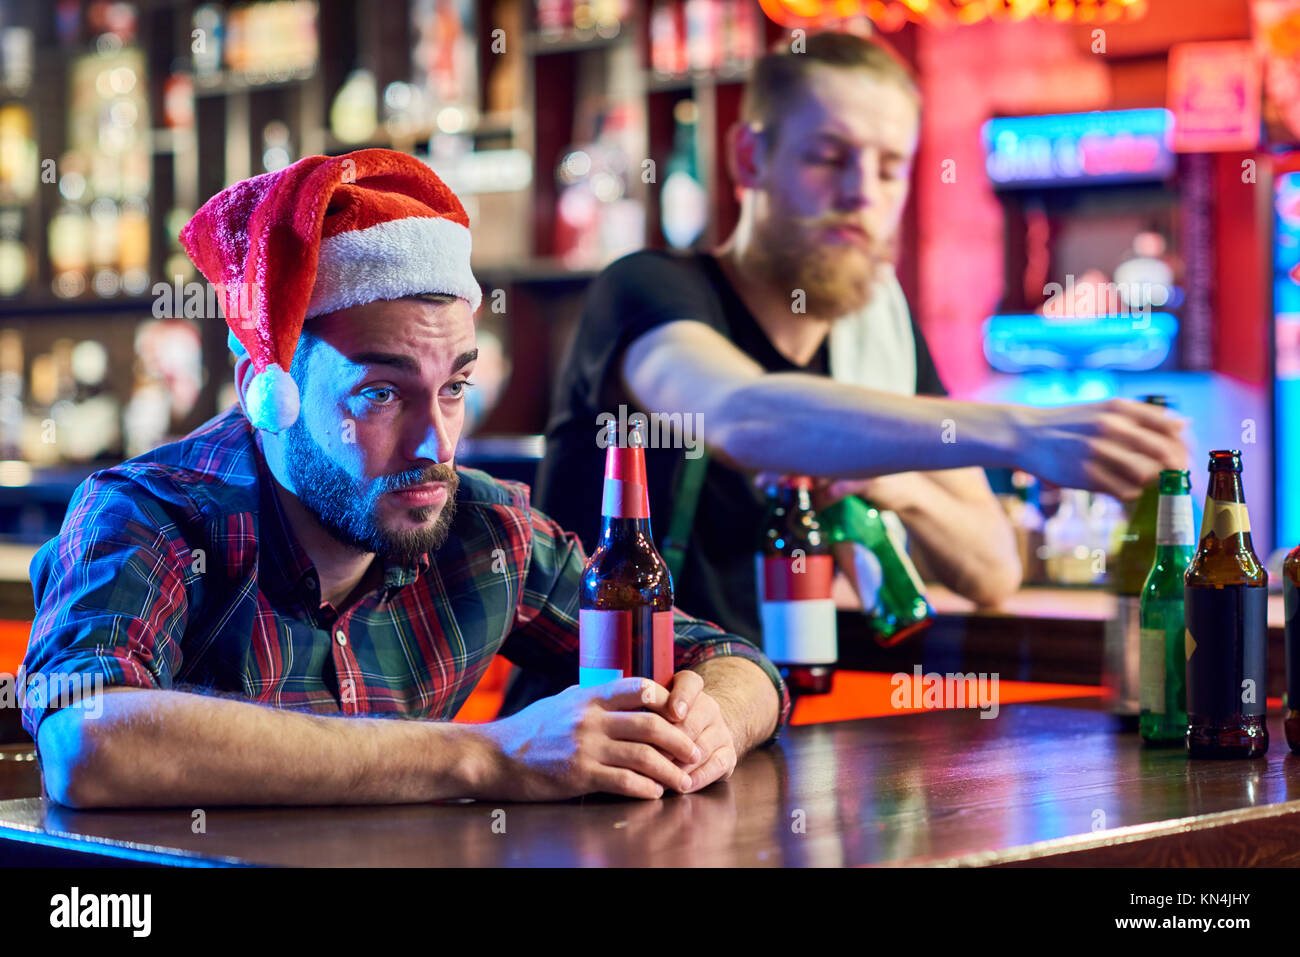 Drunk Man in Pub on Christmas Stock Photo